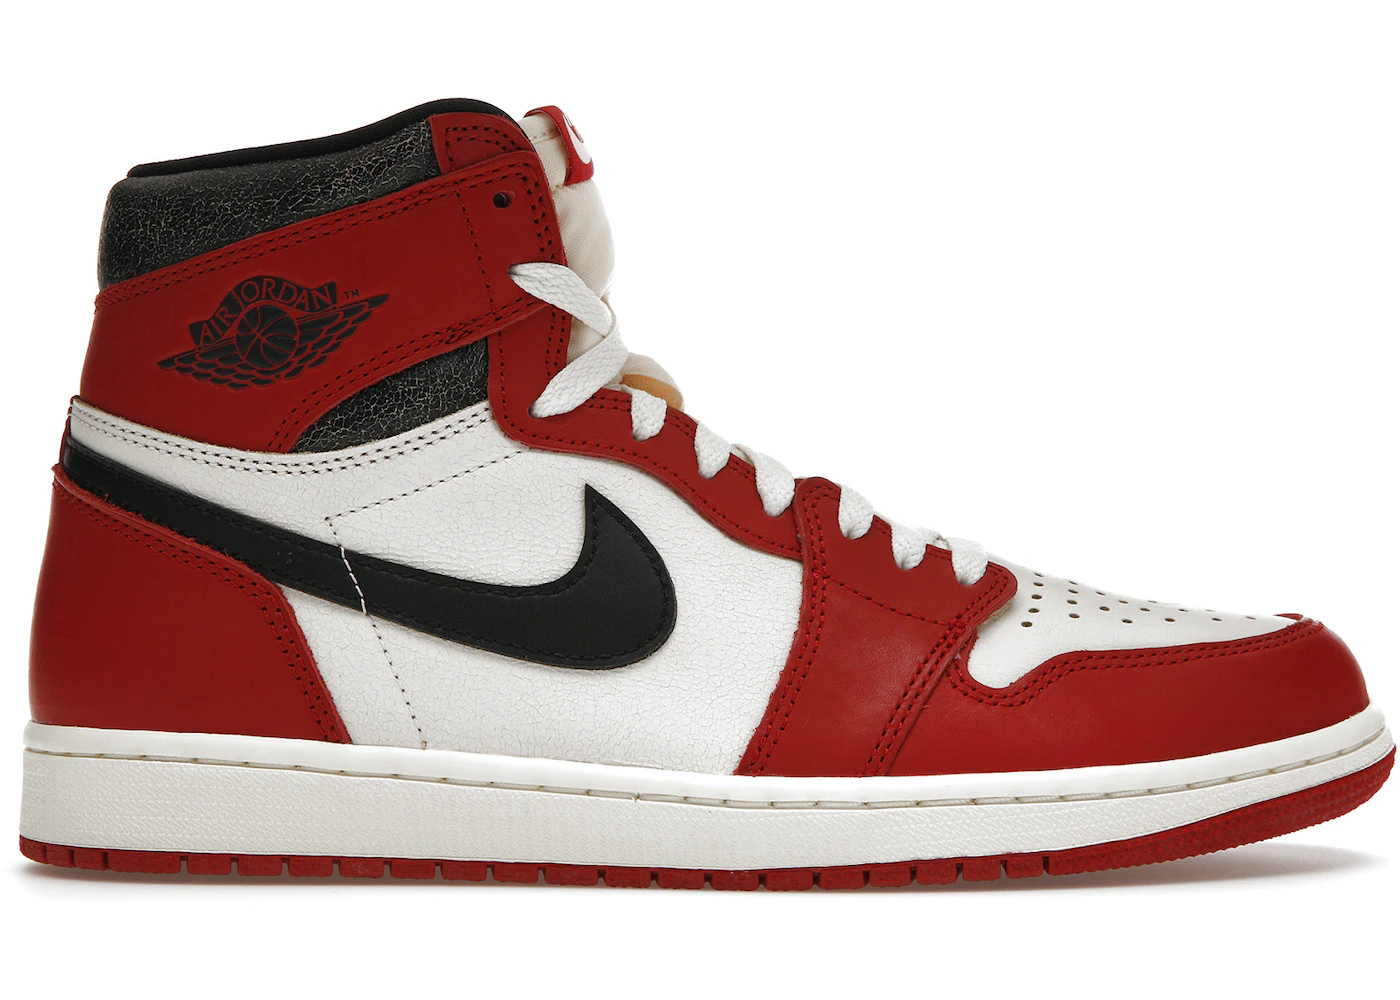 difícil Tractor Acompañar Jordan 1 Retro High OG Chicago Lost and Found Men's - DZ5485-612 - US